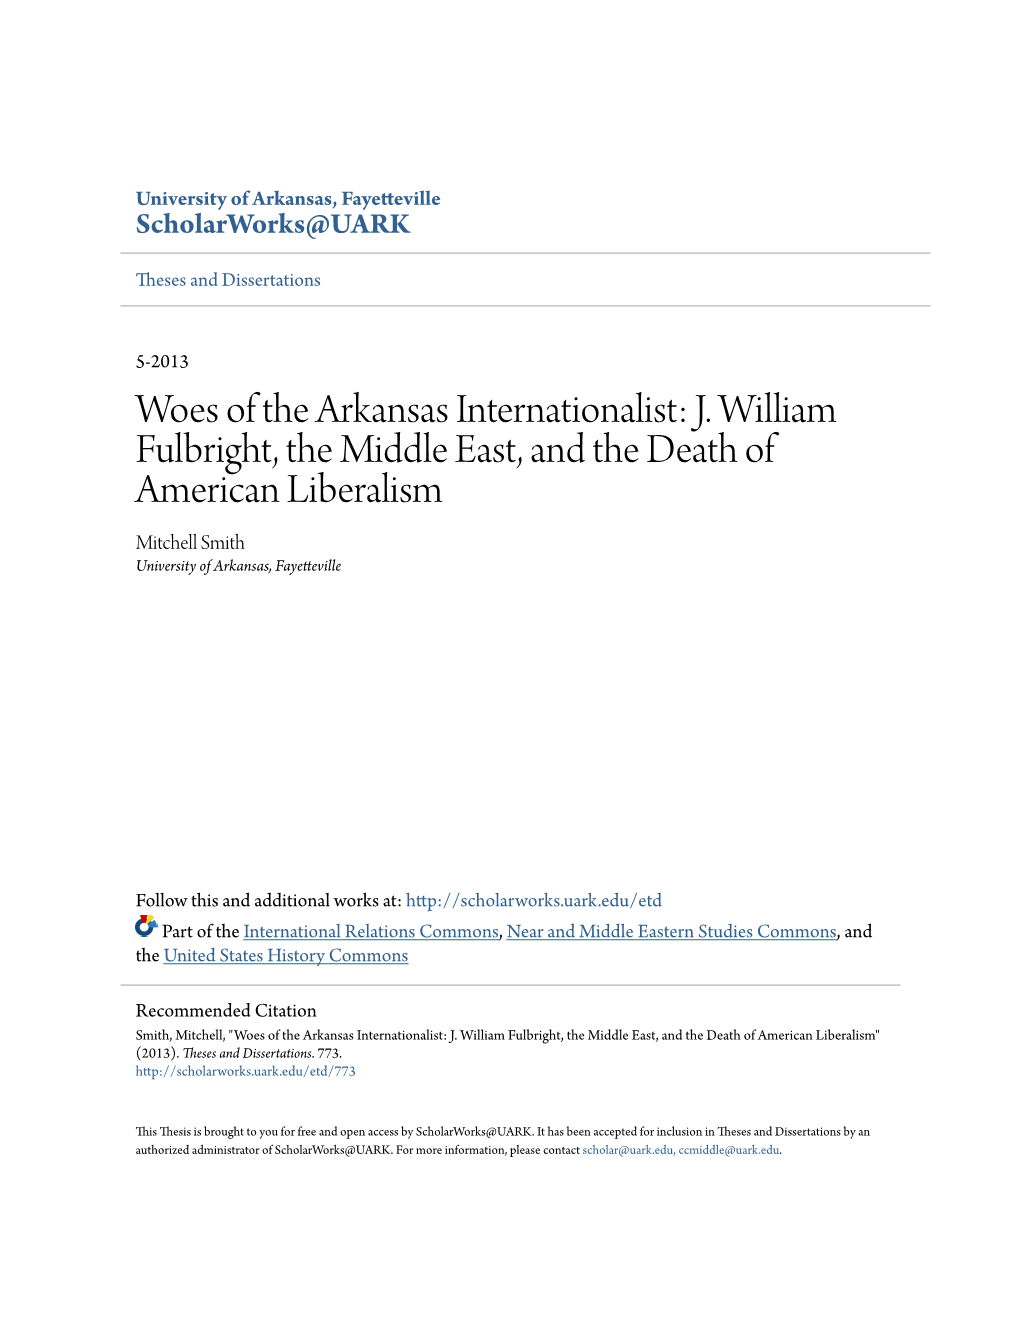 Woes of the Arkansas Internationalist: J. William Fulbright, the Middle East, and the Death of American Liberalism Mitchell Smith University of Arkansas, Fayetteville